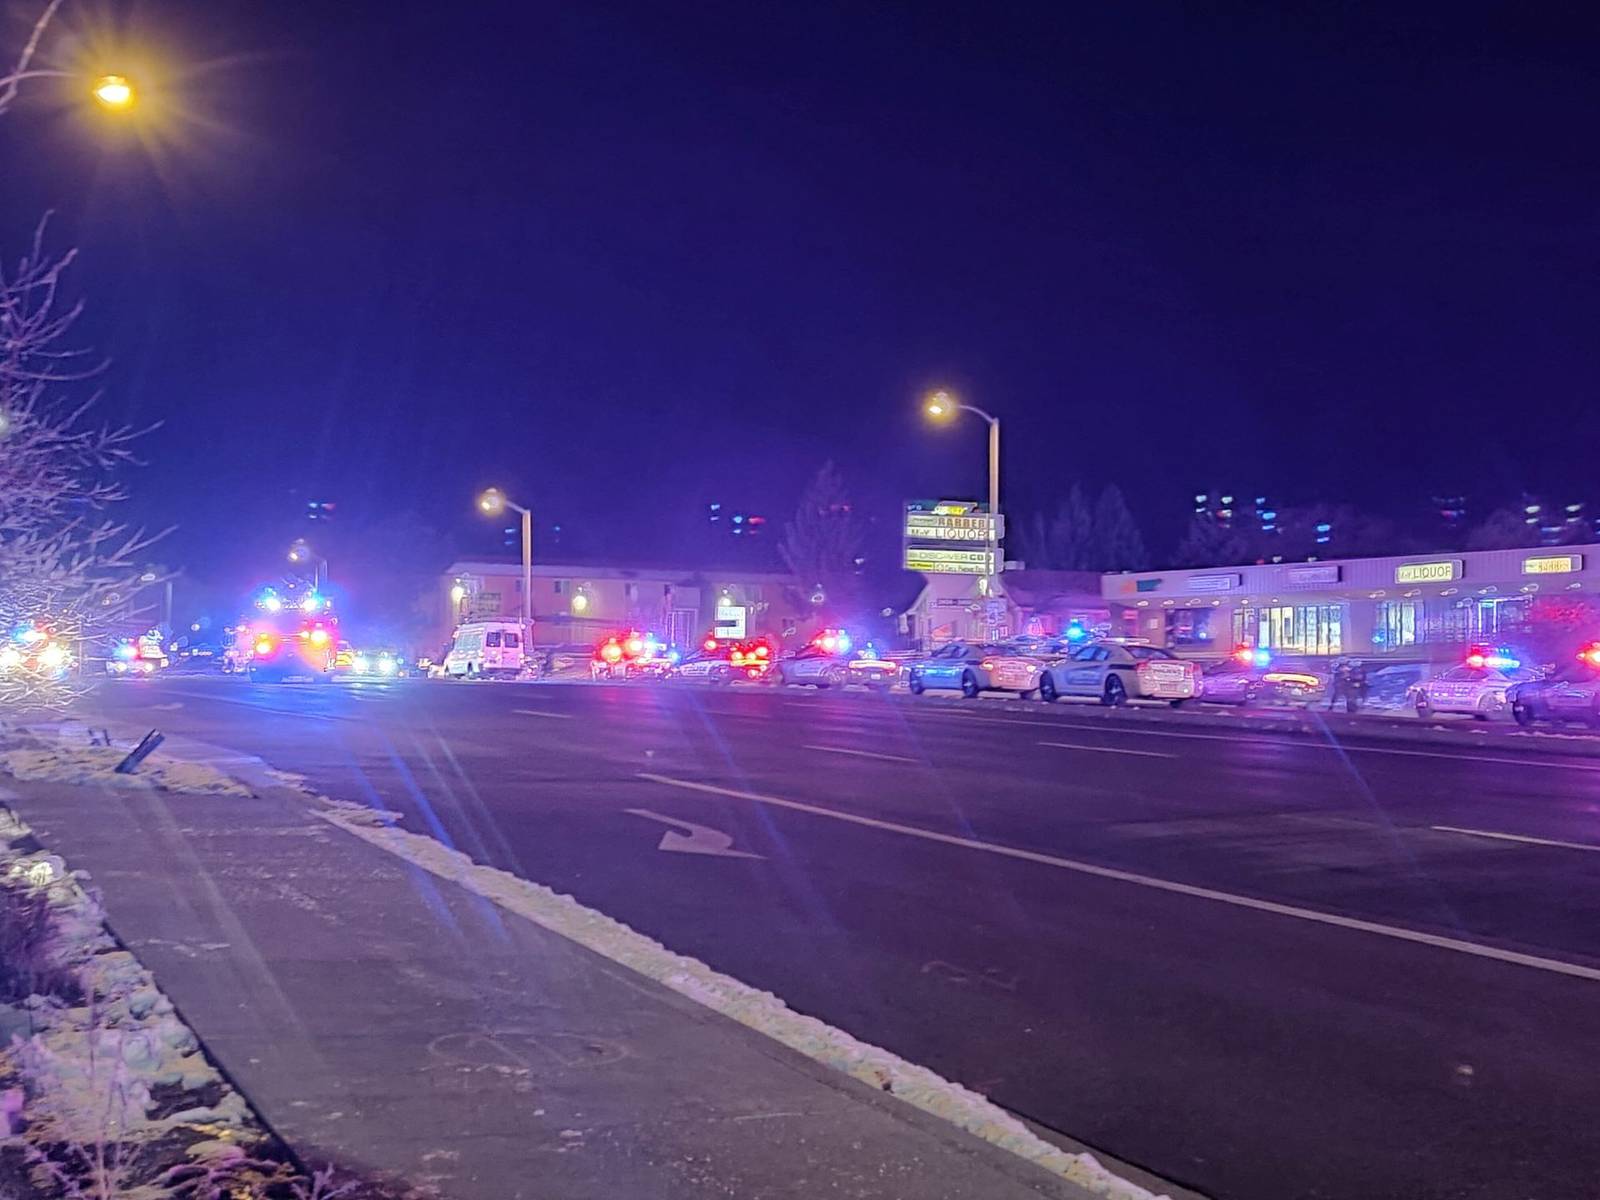 Police and emergency response vehicles at the scene of a shooting in a nighrclub, in Colorado Springs, Colorado.